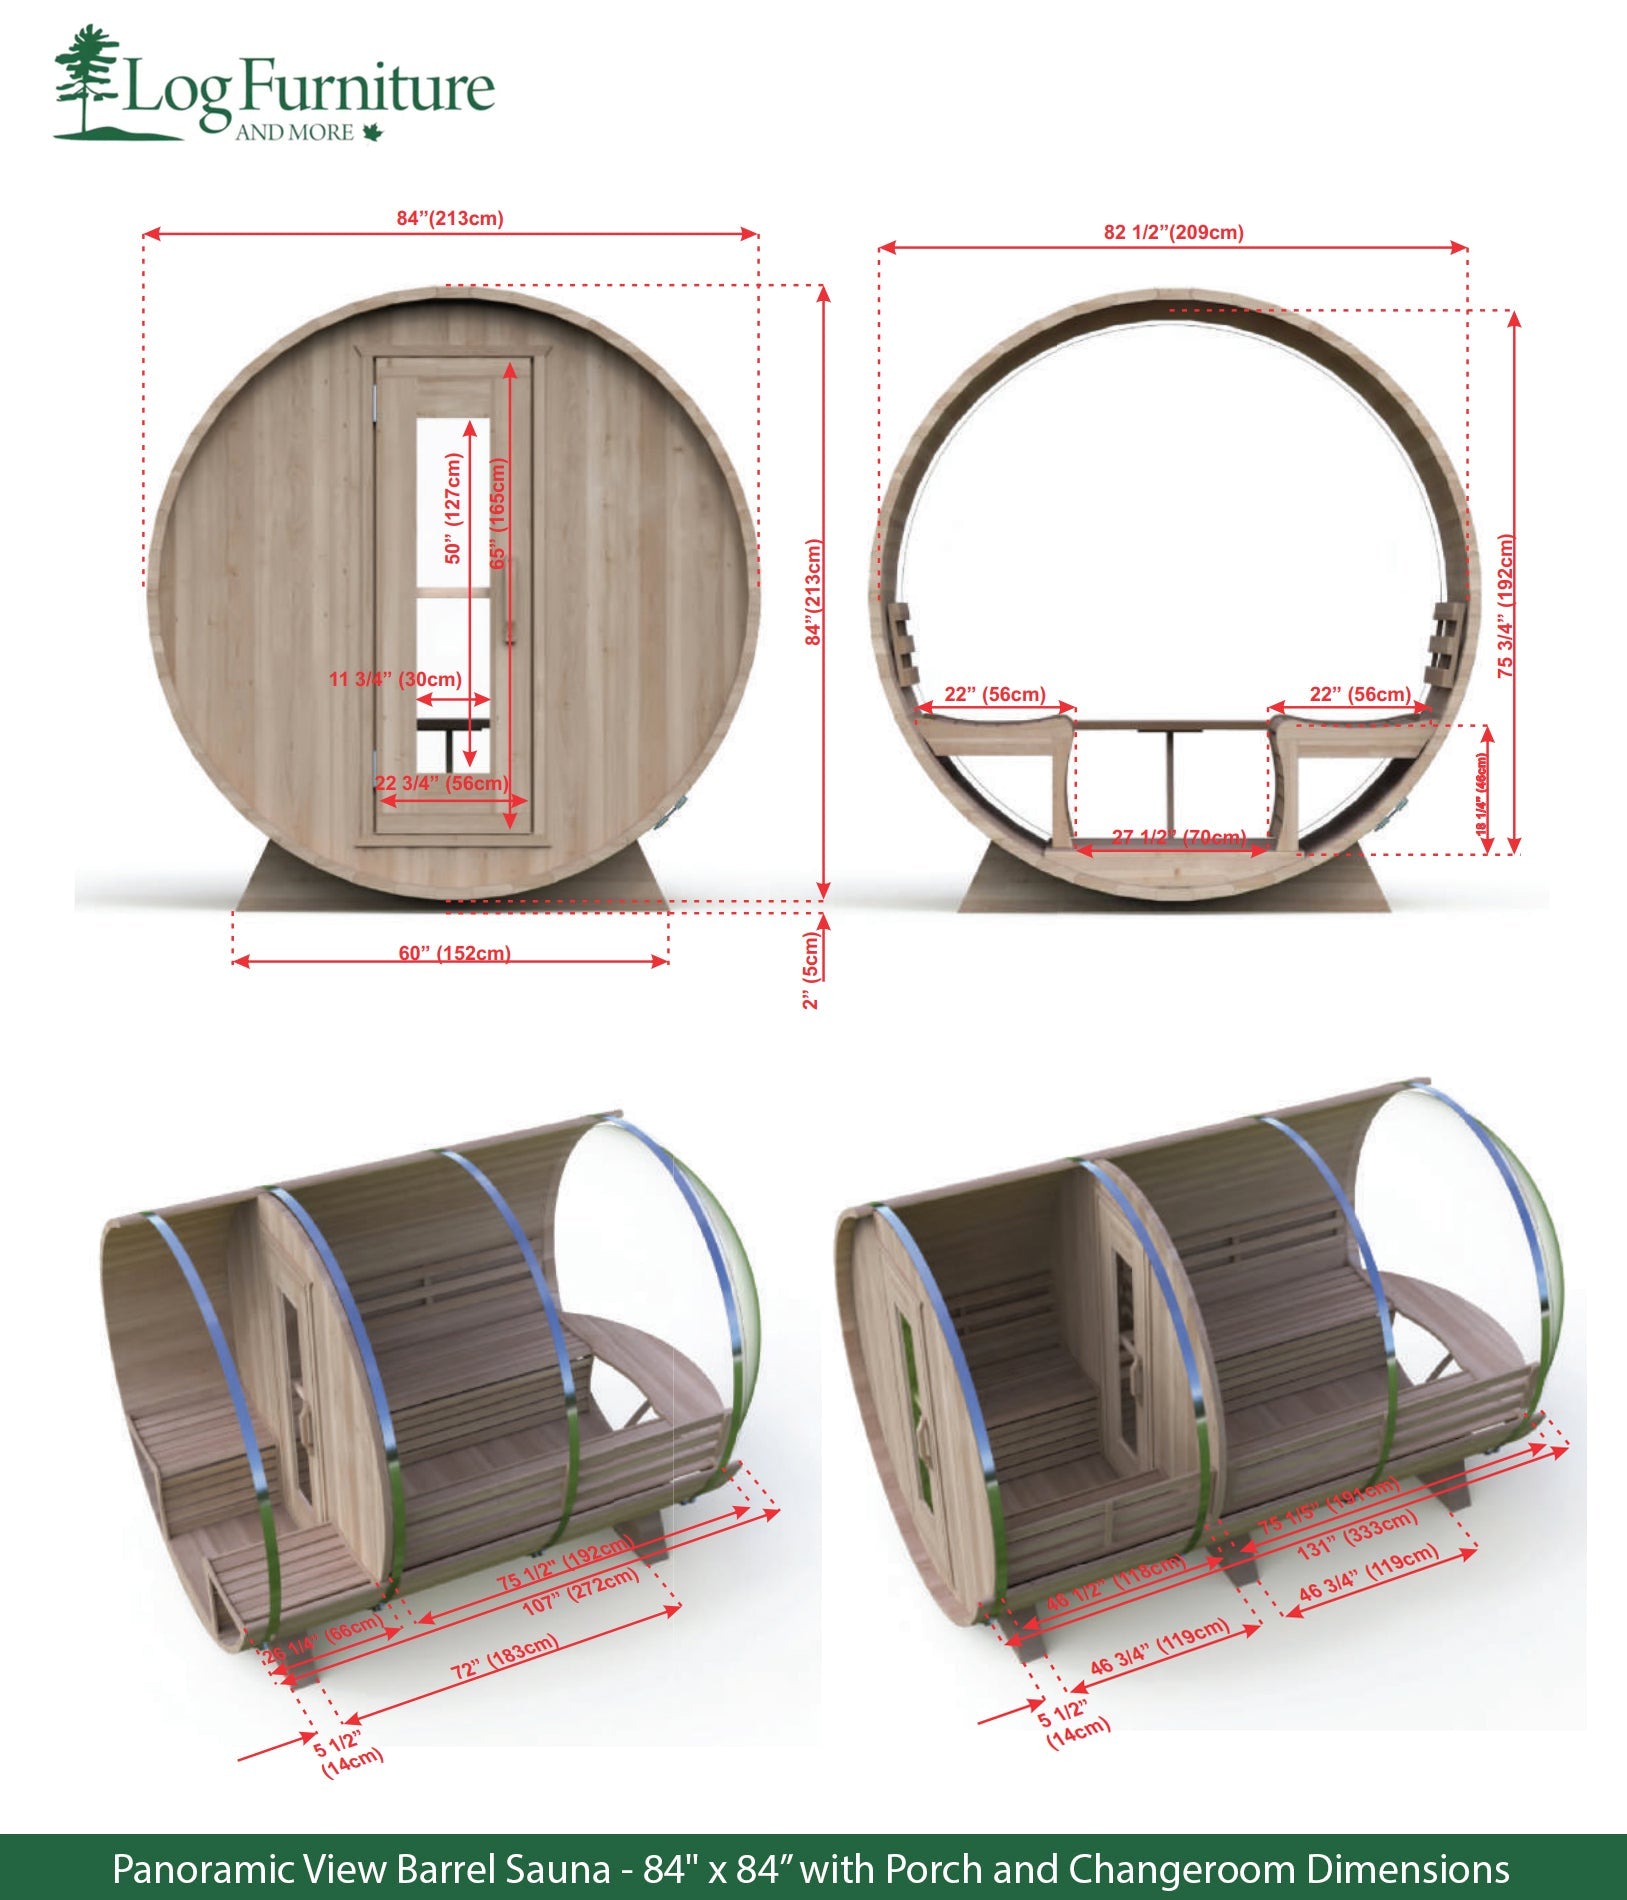 Panoramic View Barrel Sauna - 84" x 84” with Porch and Changeroom Dimensions